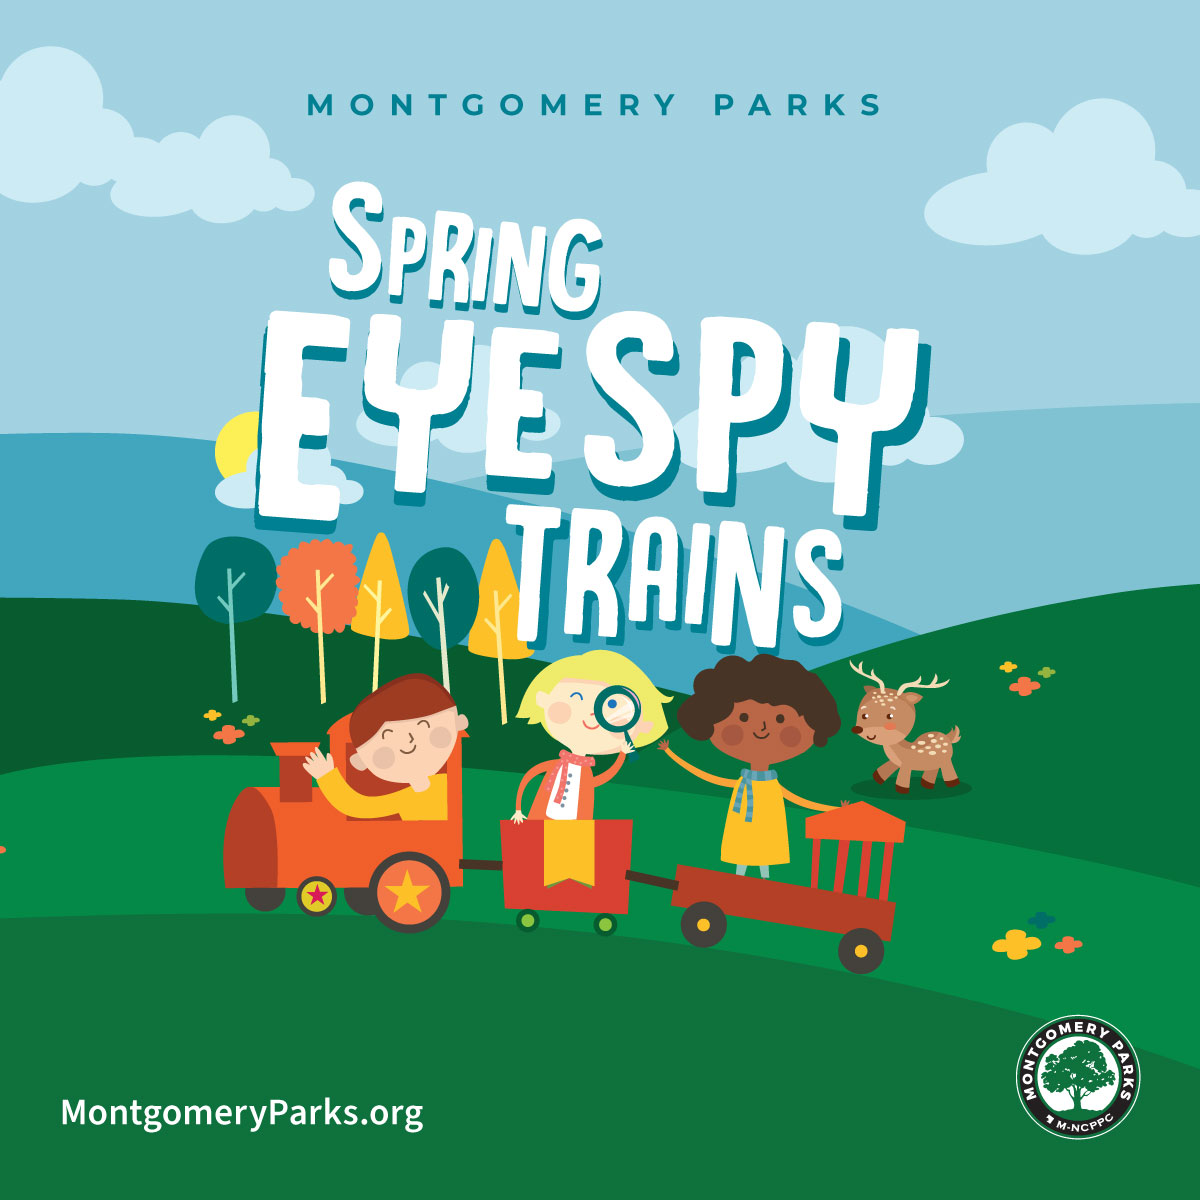 Event Branding Eye Spy Trains March 23-31 and Weekends in April